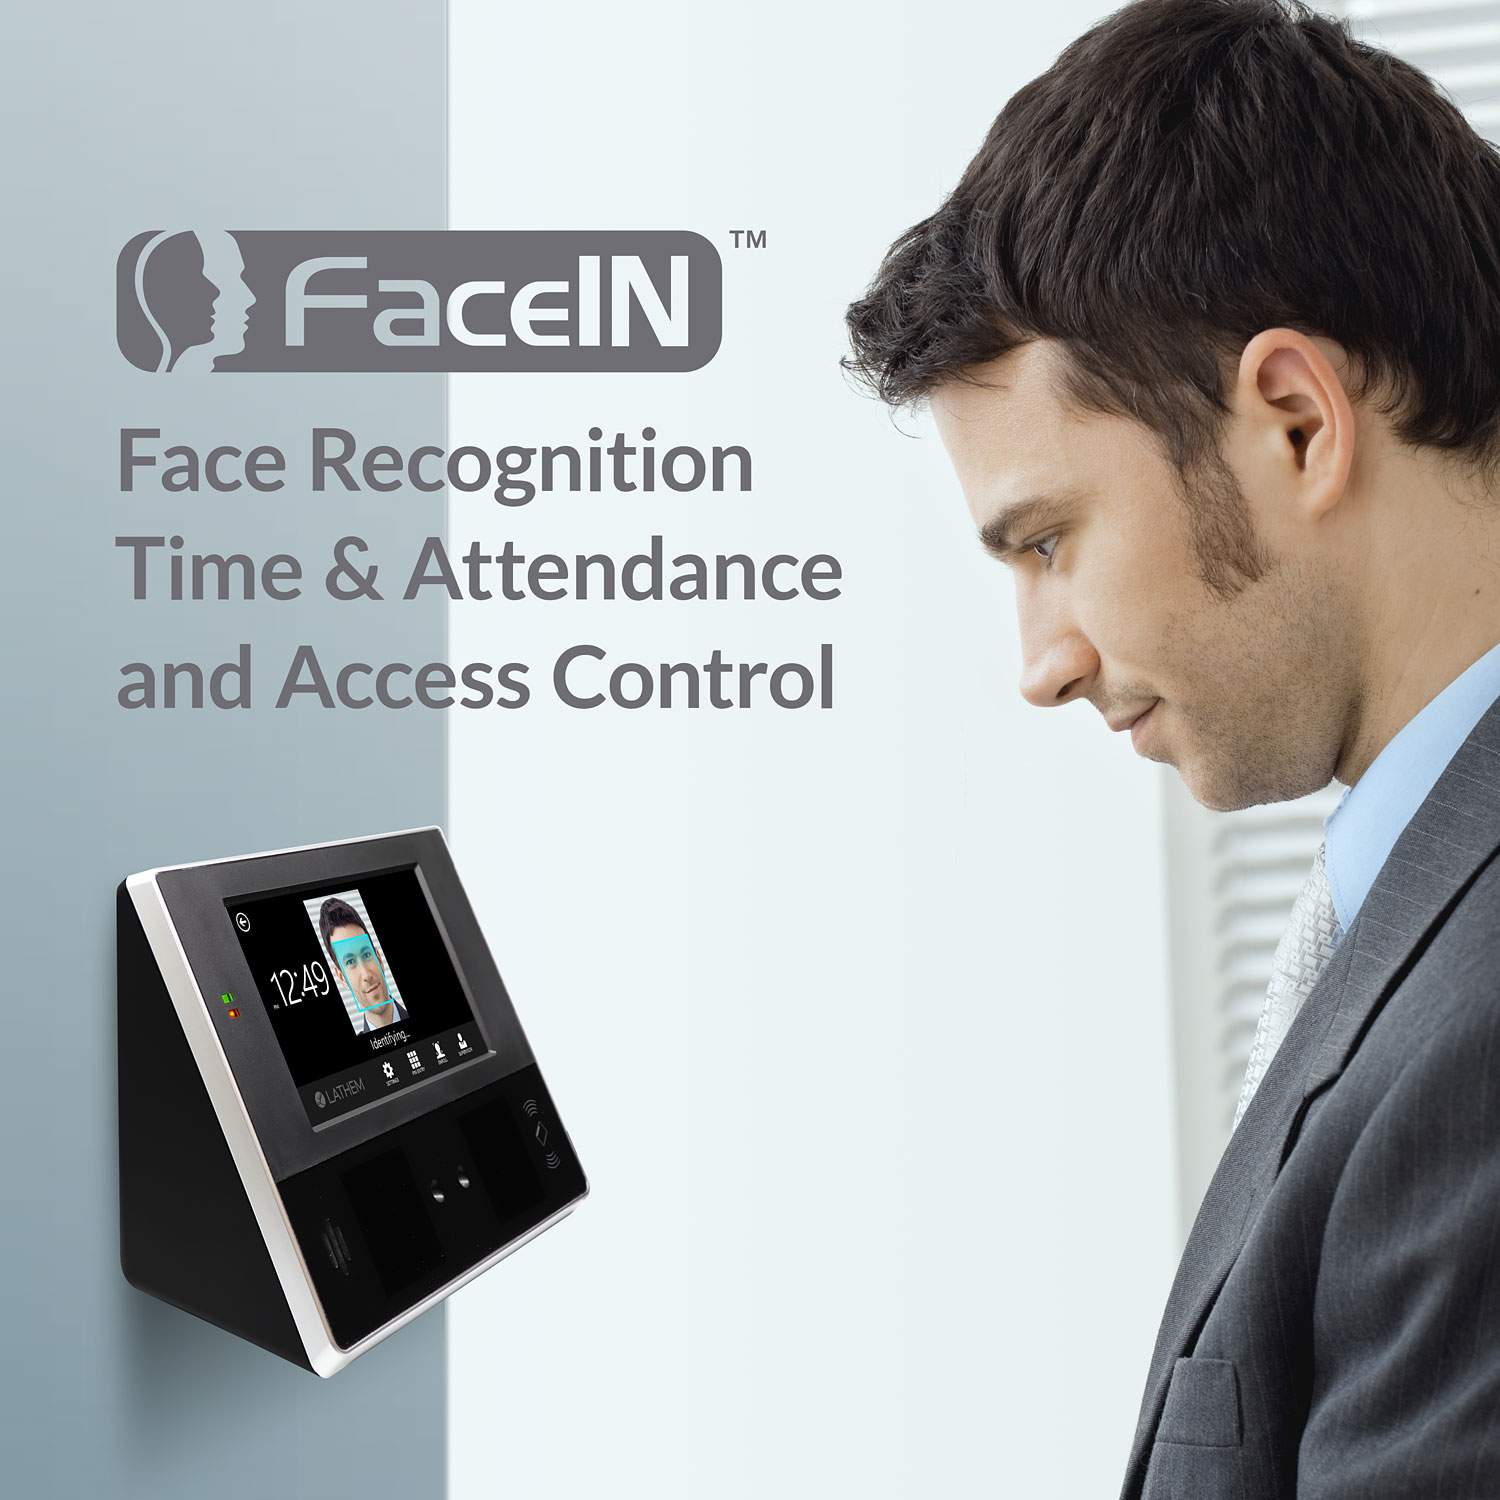 Lathem Introduces Latest Face Recognition Time Clock The Facein Ct74 The Next Evolution In Employee Time And Attendance